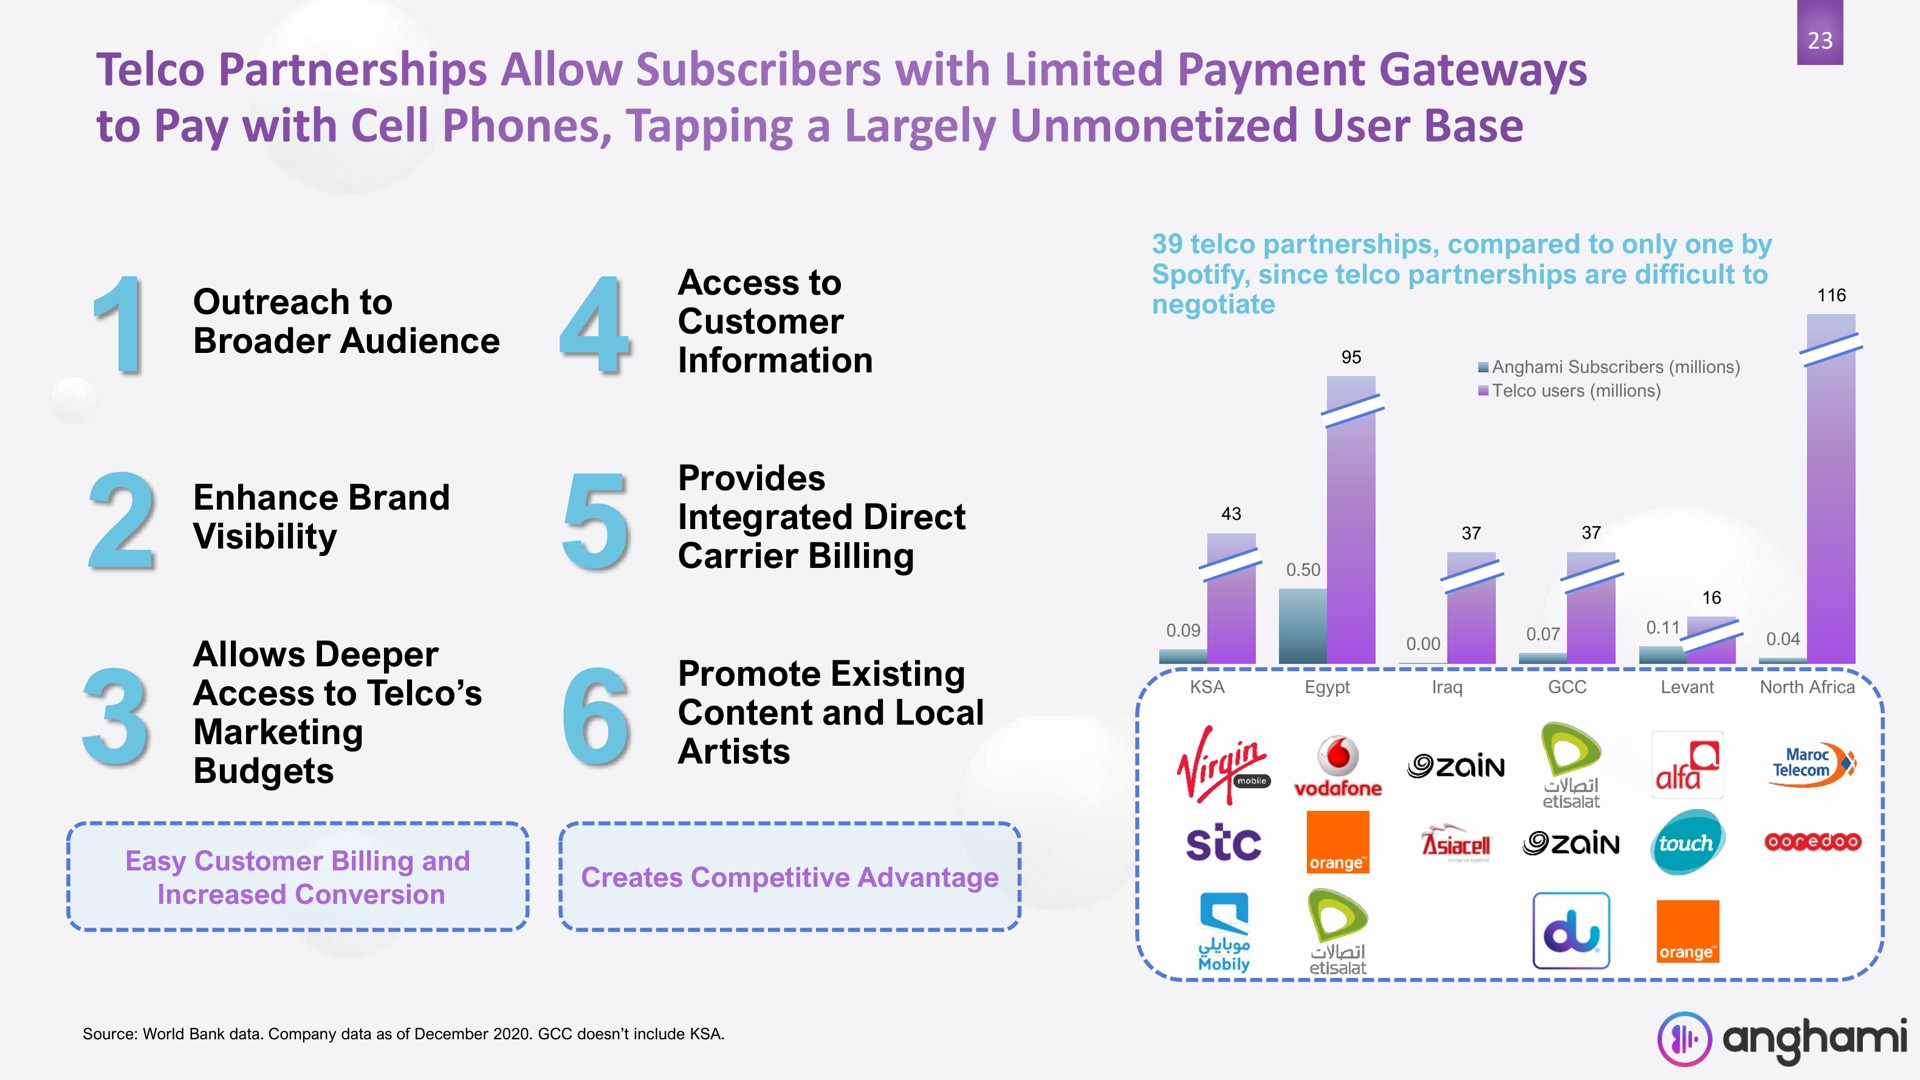 partnerships allow subscribers with limited payment gateways to pay with cell phones tapping a largely user base an a a | Anghami